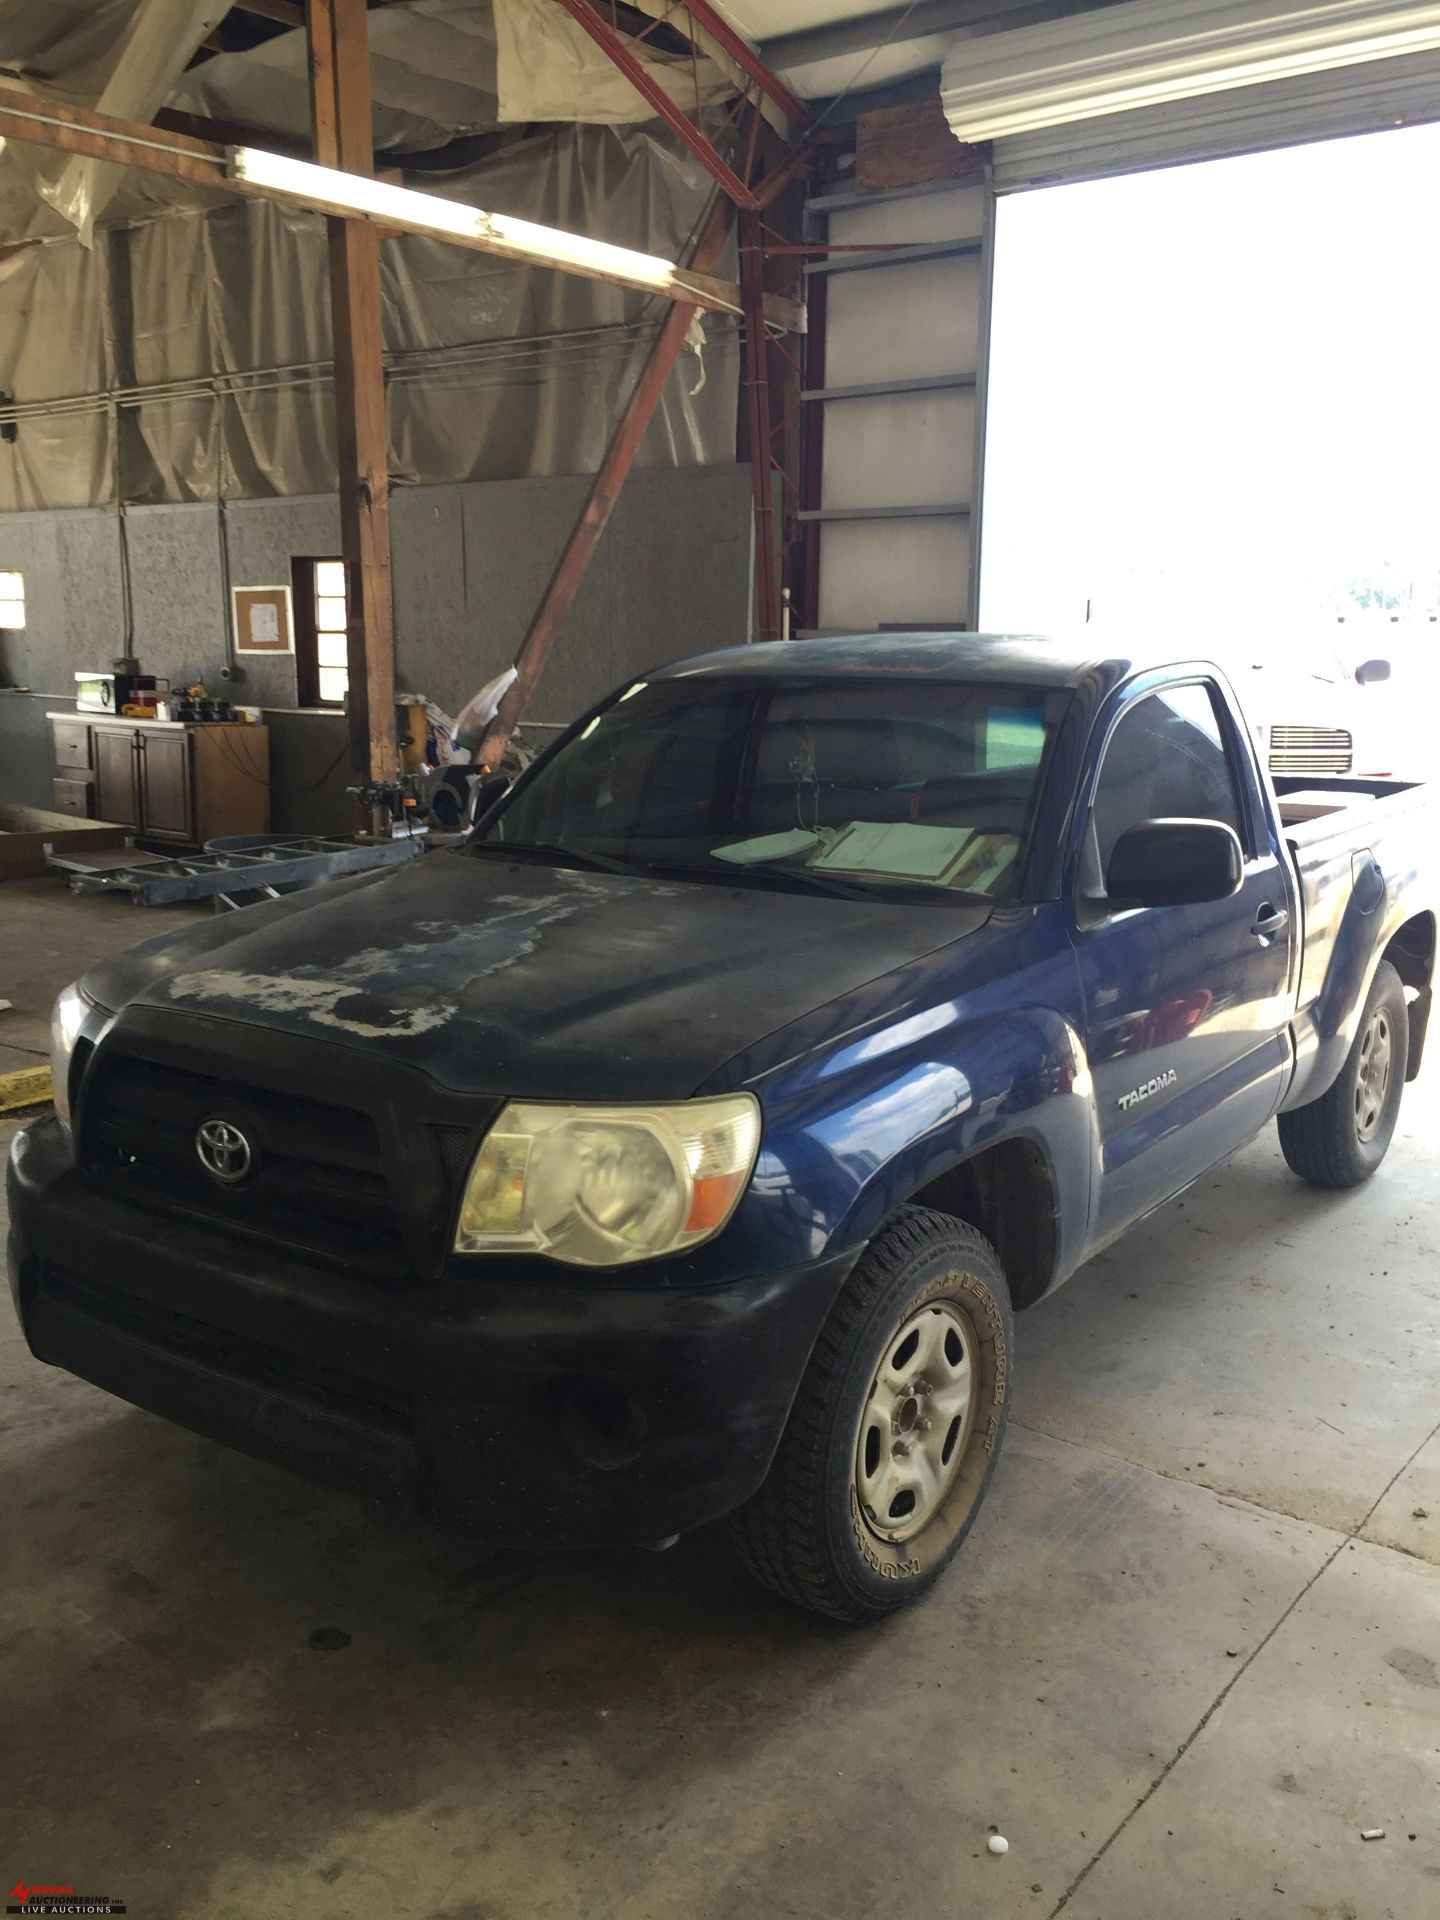 2007 TOYOTA REGULAR CAB TACOMA PICKUP TRUCK, 2.7L GAS ENGINE, AUTOMATIC TRANS, AM/FM/CD, DRIVER SEAT - Image 2 of 6